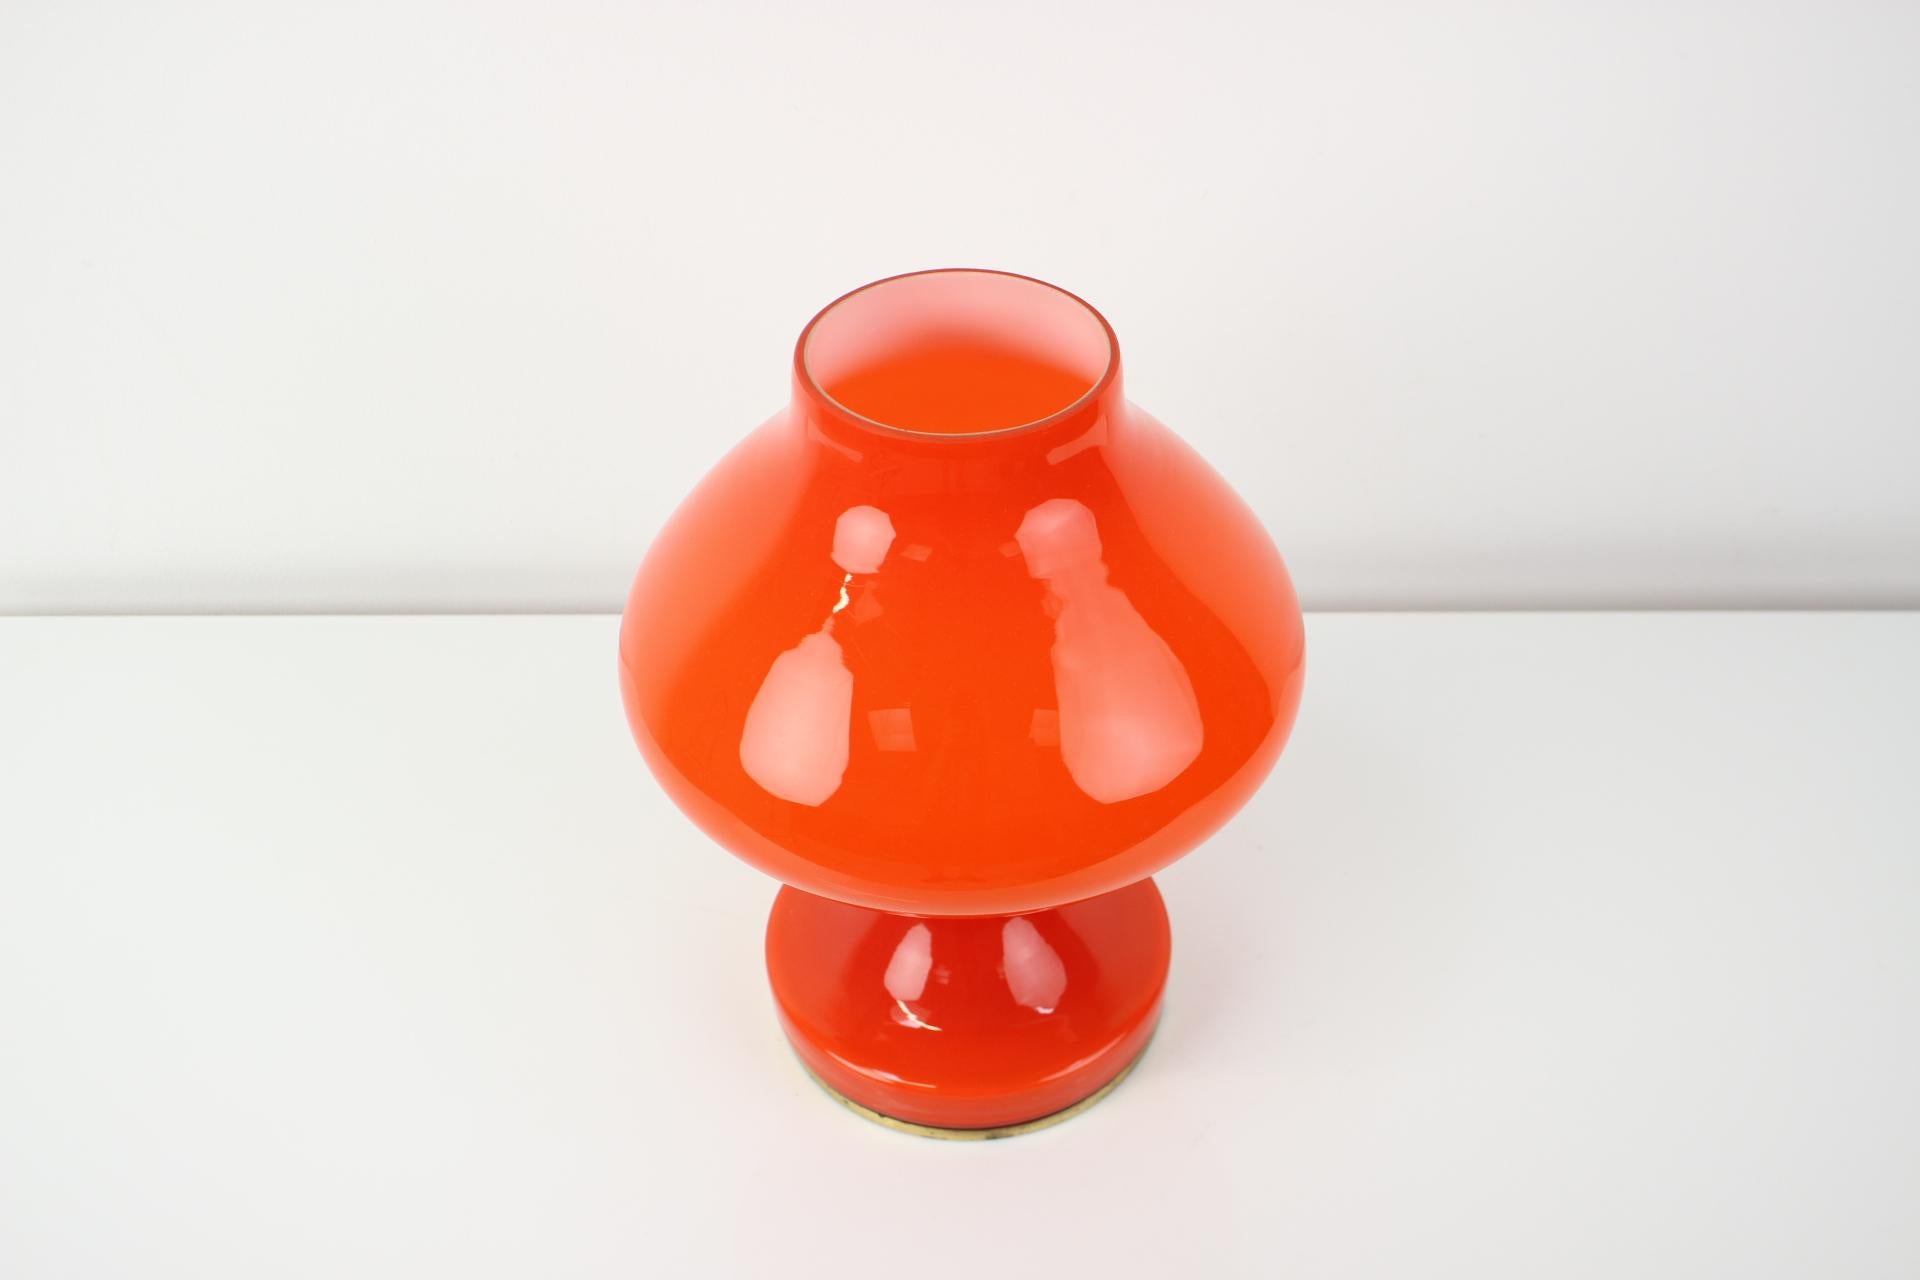 - Made in Czechoslovakia
- Made of metal, glass
- Re-polished
- Fully functional
- Good, original condition
- The color is orange.